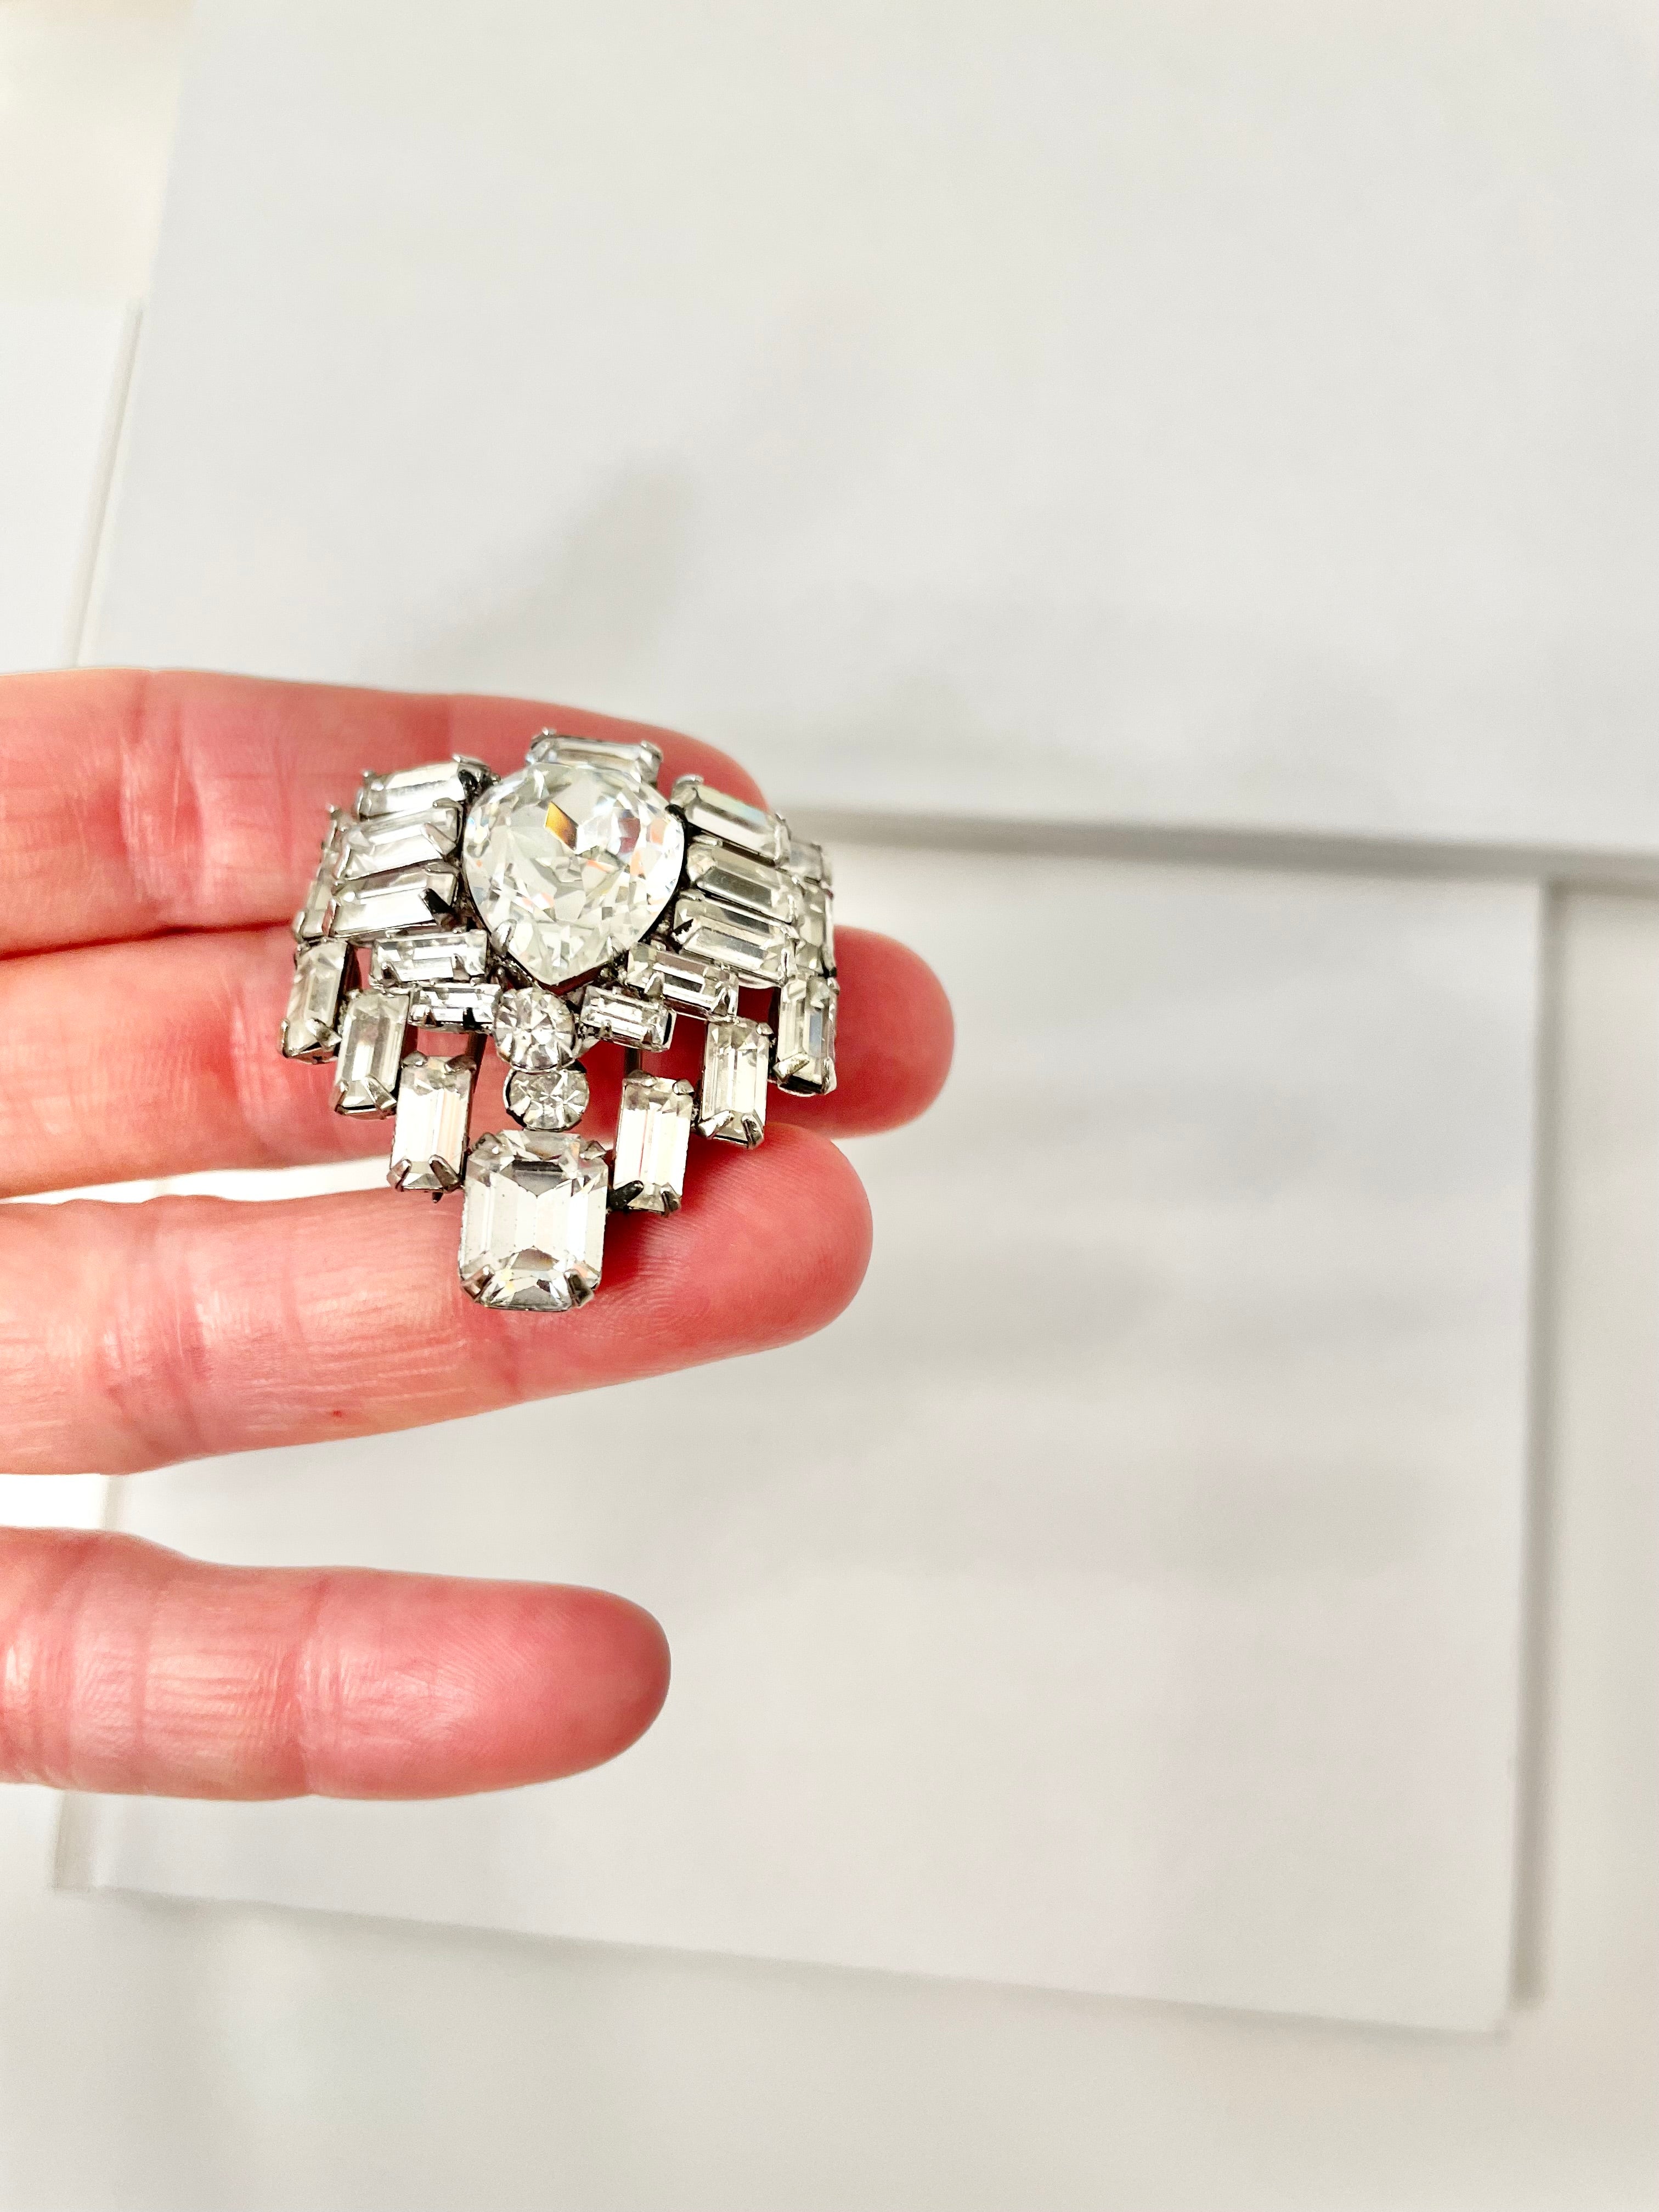 The Heiress and her vault jewels... this 1930's divine glass fur clip is outstanding!